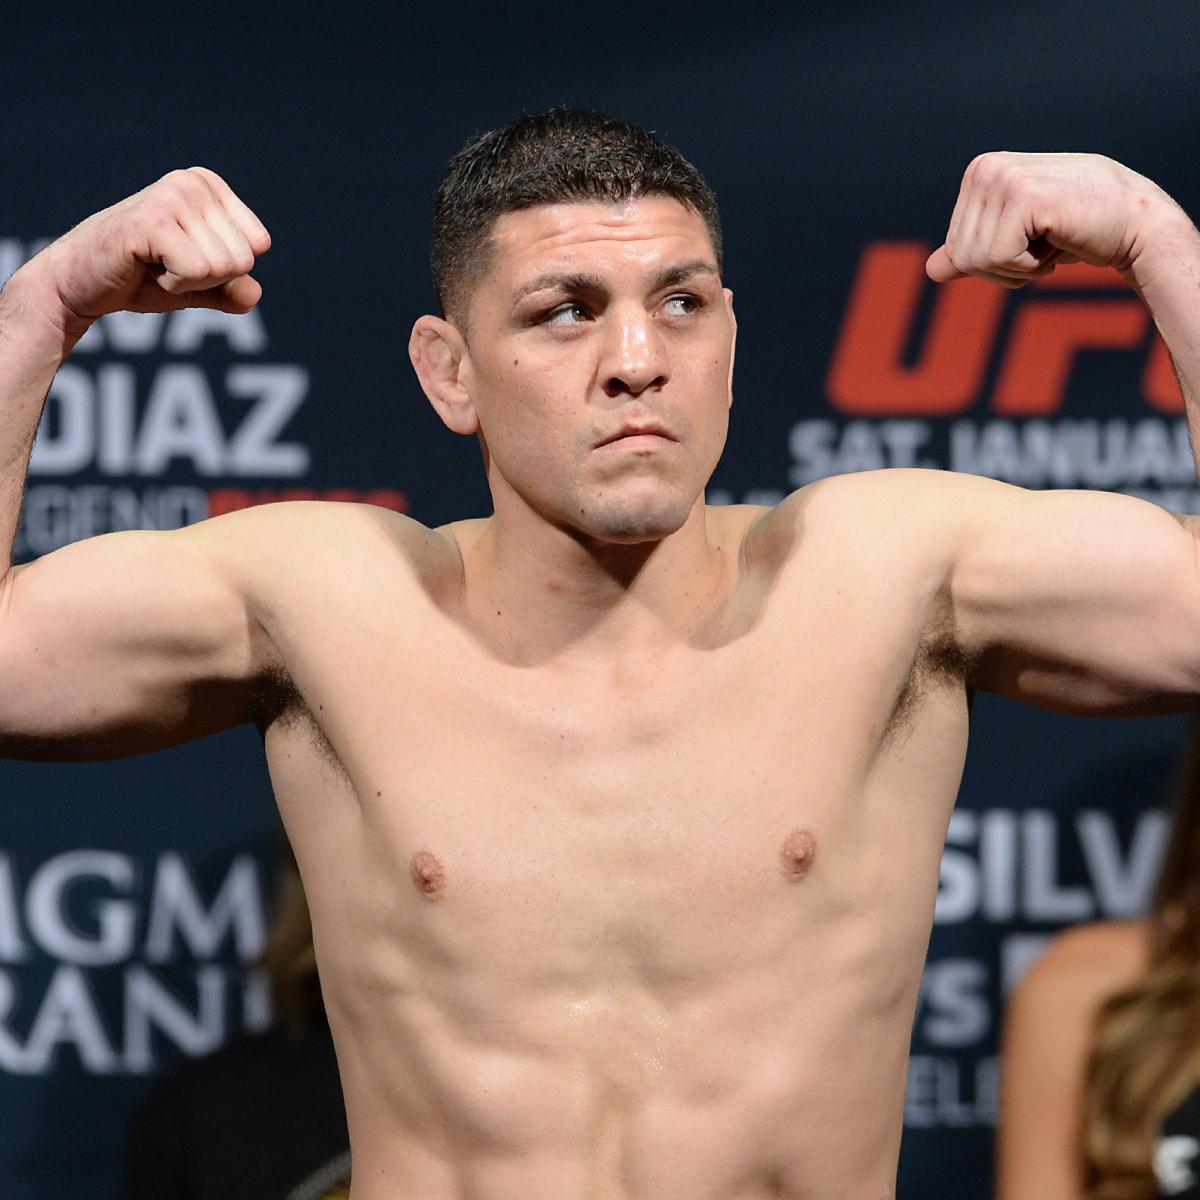 Nick Diaz Returns The Best Opponents for His 1st Fight Back News